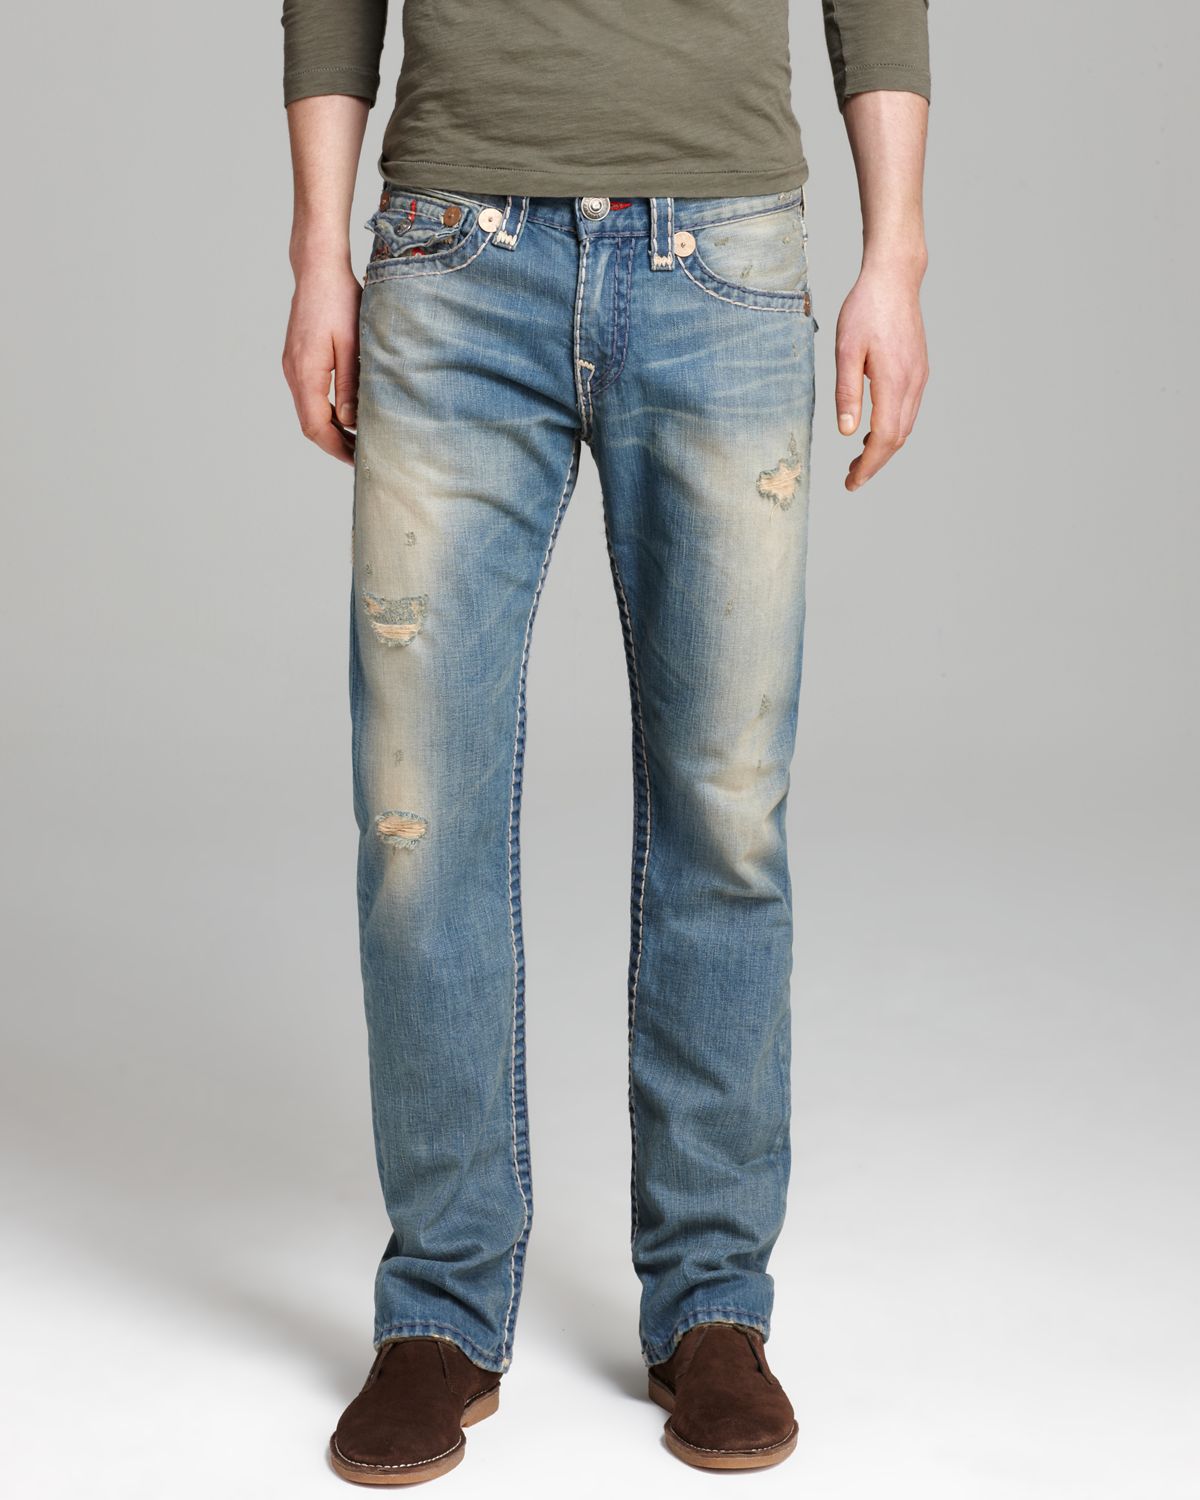 Lyst - True religion Jeans Ricky Super T Straight Fit in Wickett in ...